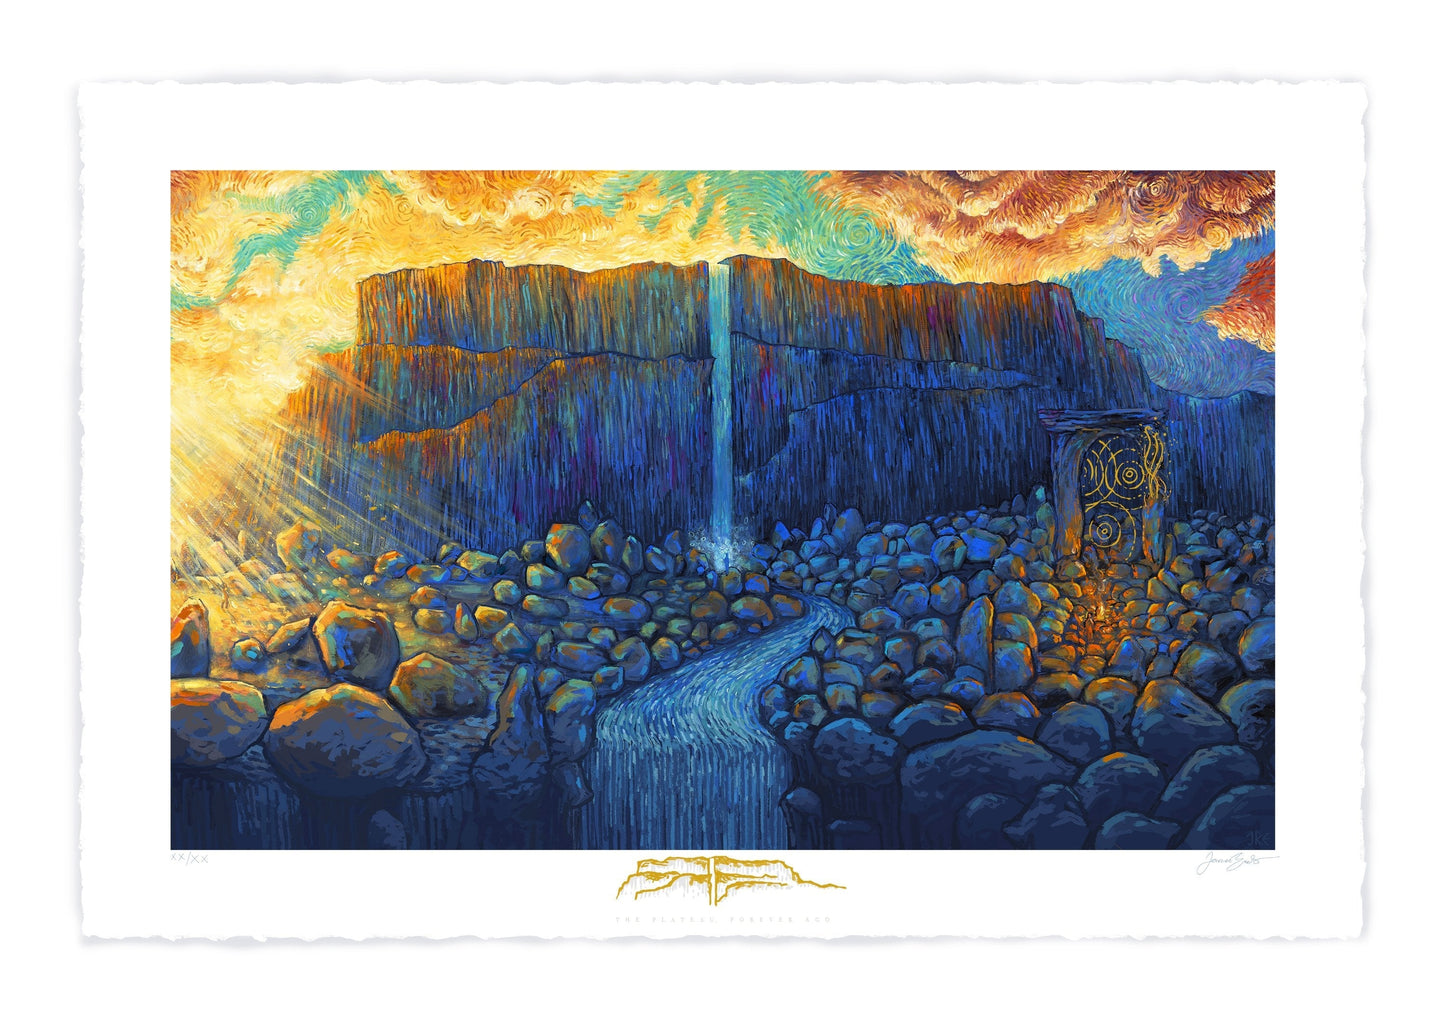 The Plateau, Forever Ago (MP) Print James R. Eads 